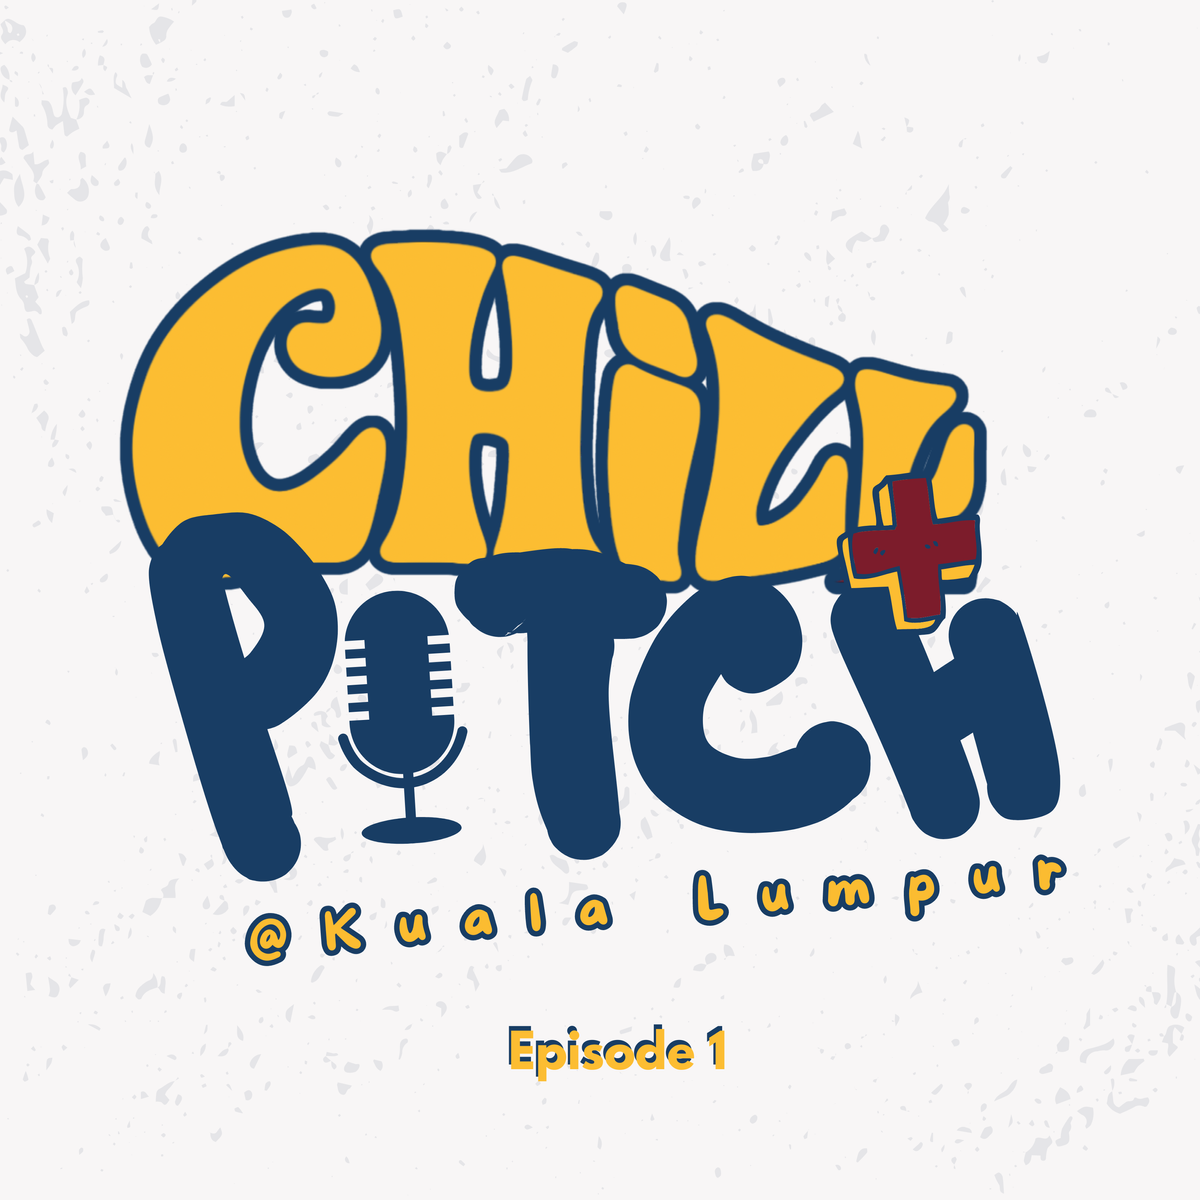 From Men’s Health to a Debating Community, Here Are 10 Companies That Pitch During Chill+Pitch: Kuala Lumpur Episode 1